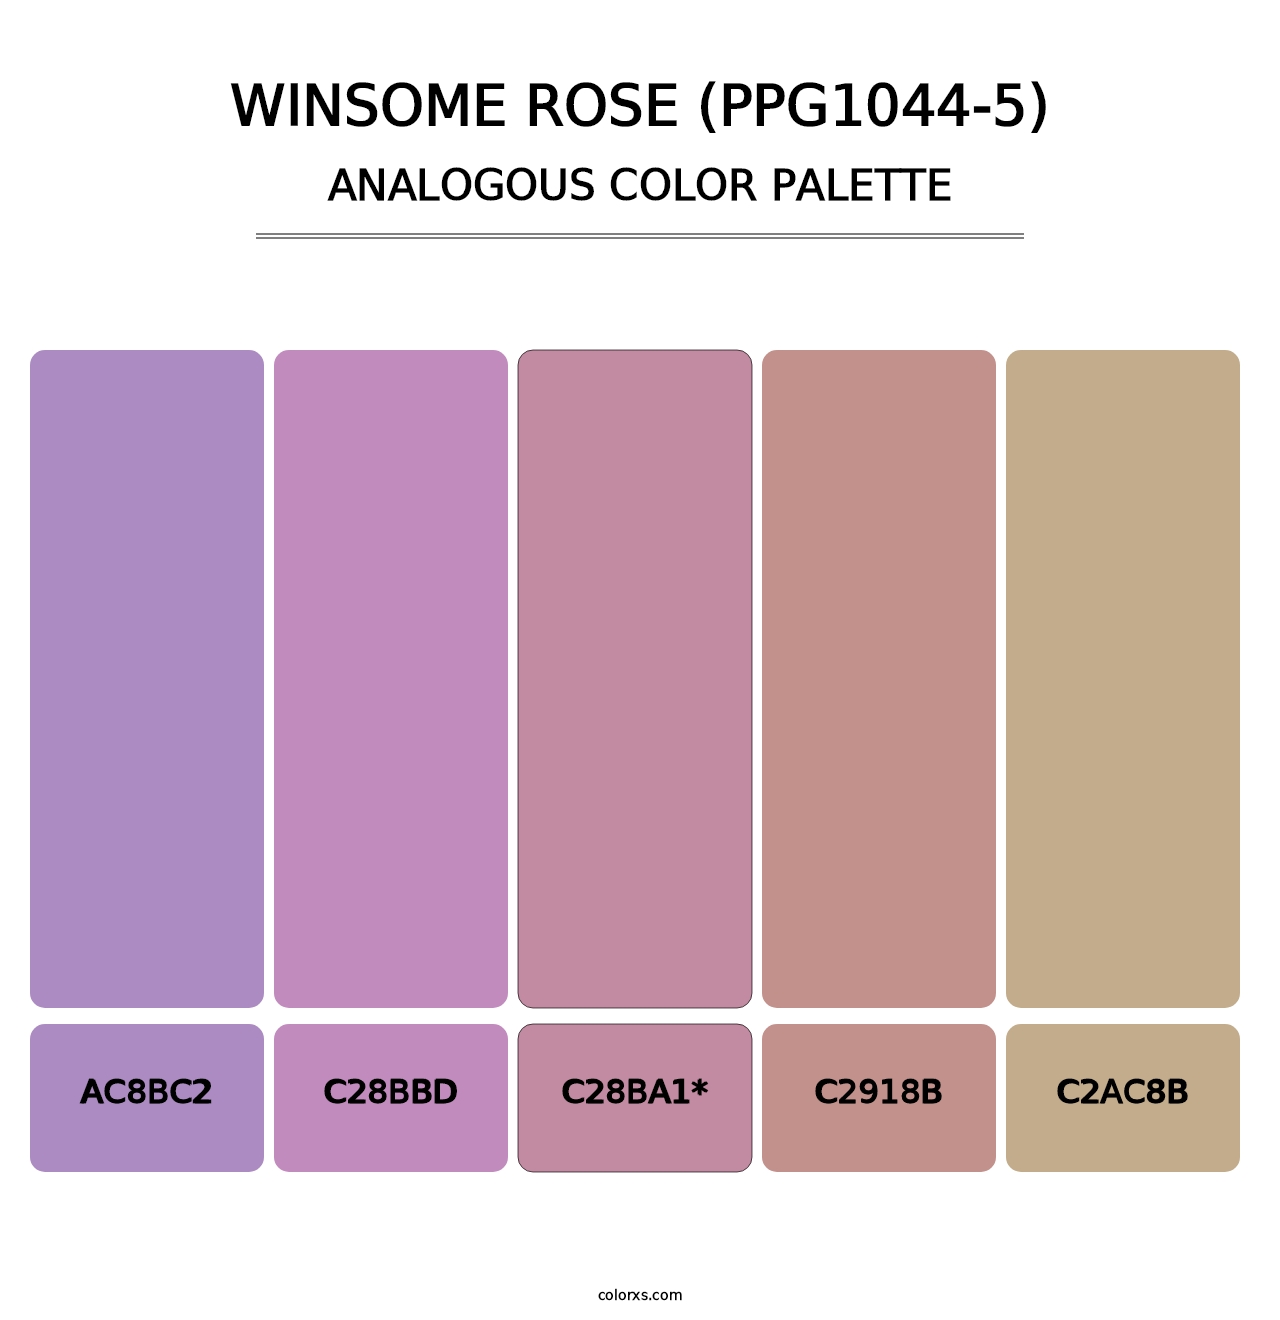 Winsome Rose (PPG1044-5) - Analogous Color Palette